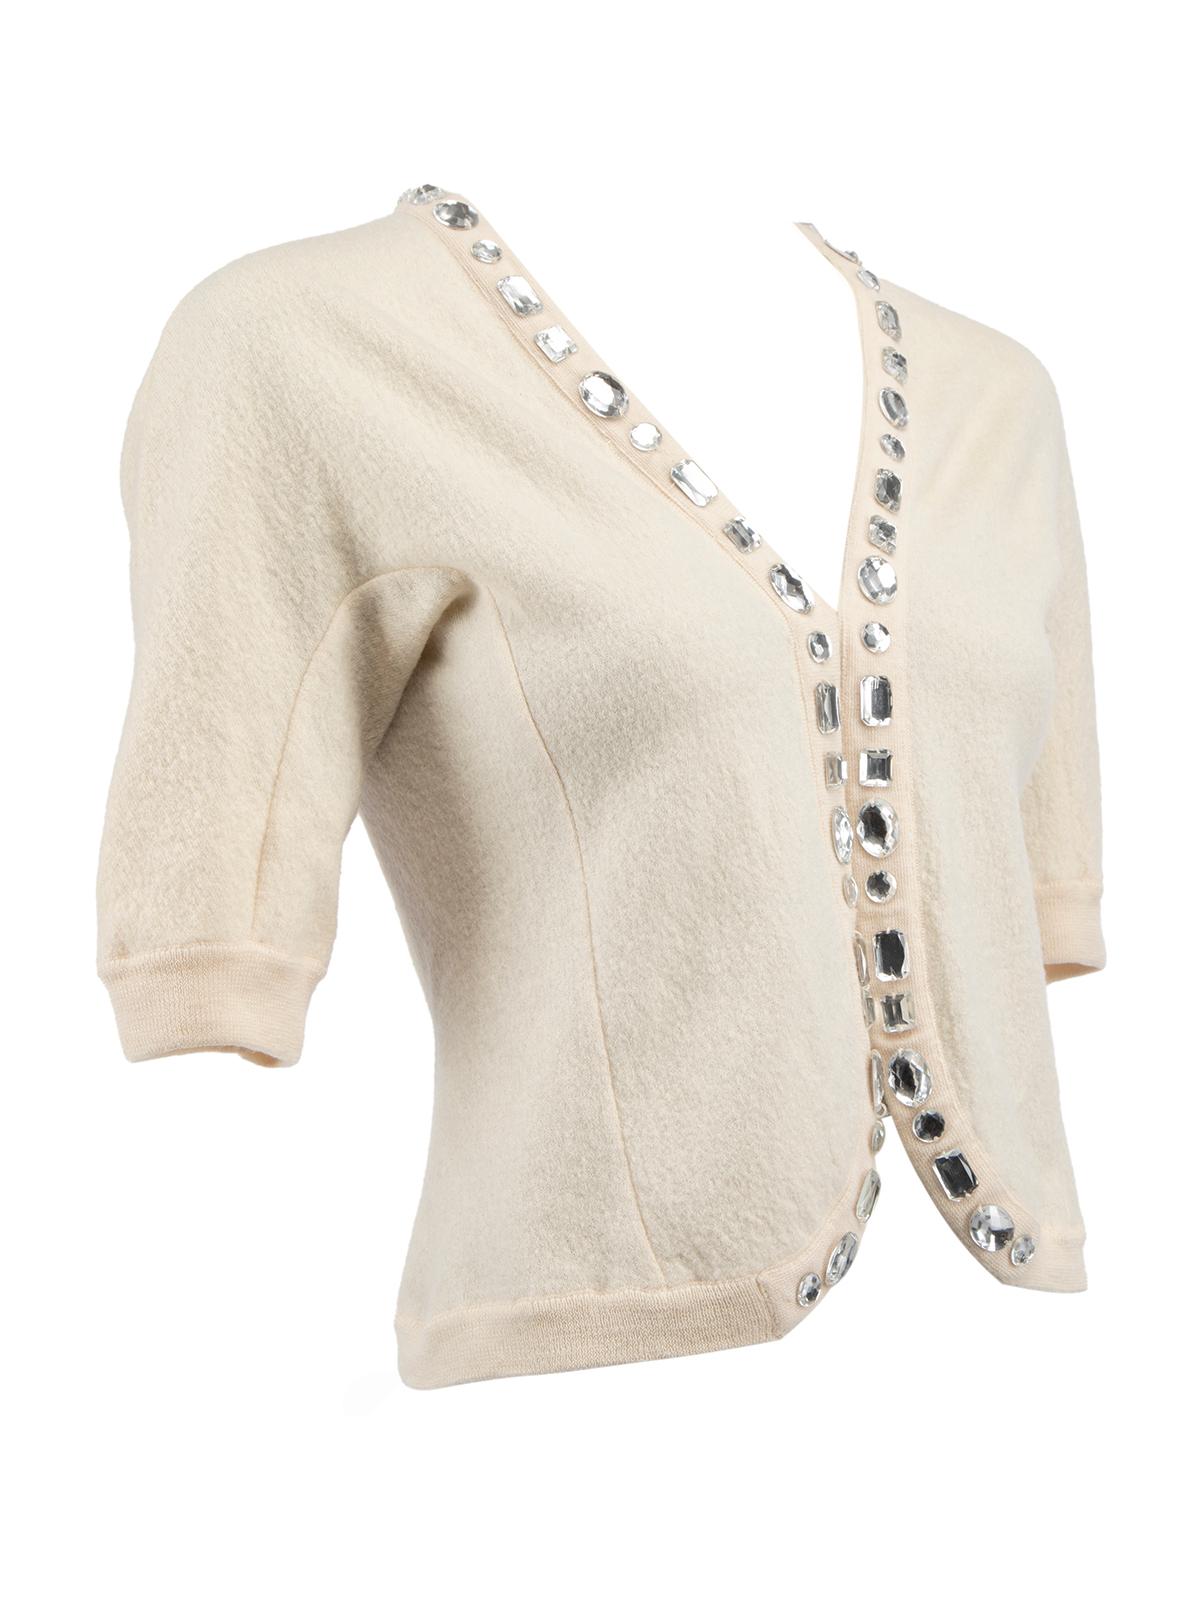 CONDITION is Very good. Hardly any visible wear to cardigan is evident on this used Marc Jacobs designer resale item.  Details  Beige Wool Faux diamond embellishments Short sleeves Open front Round collar Elasticated sleeves Back bow detail Relaxed